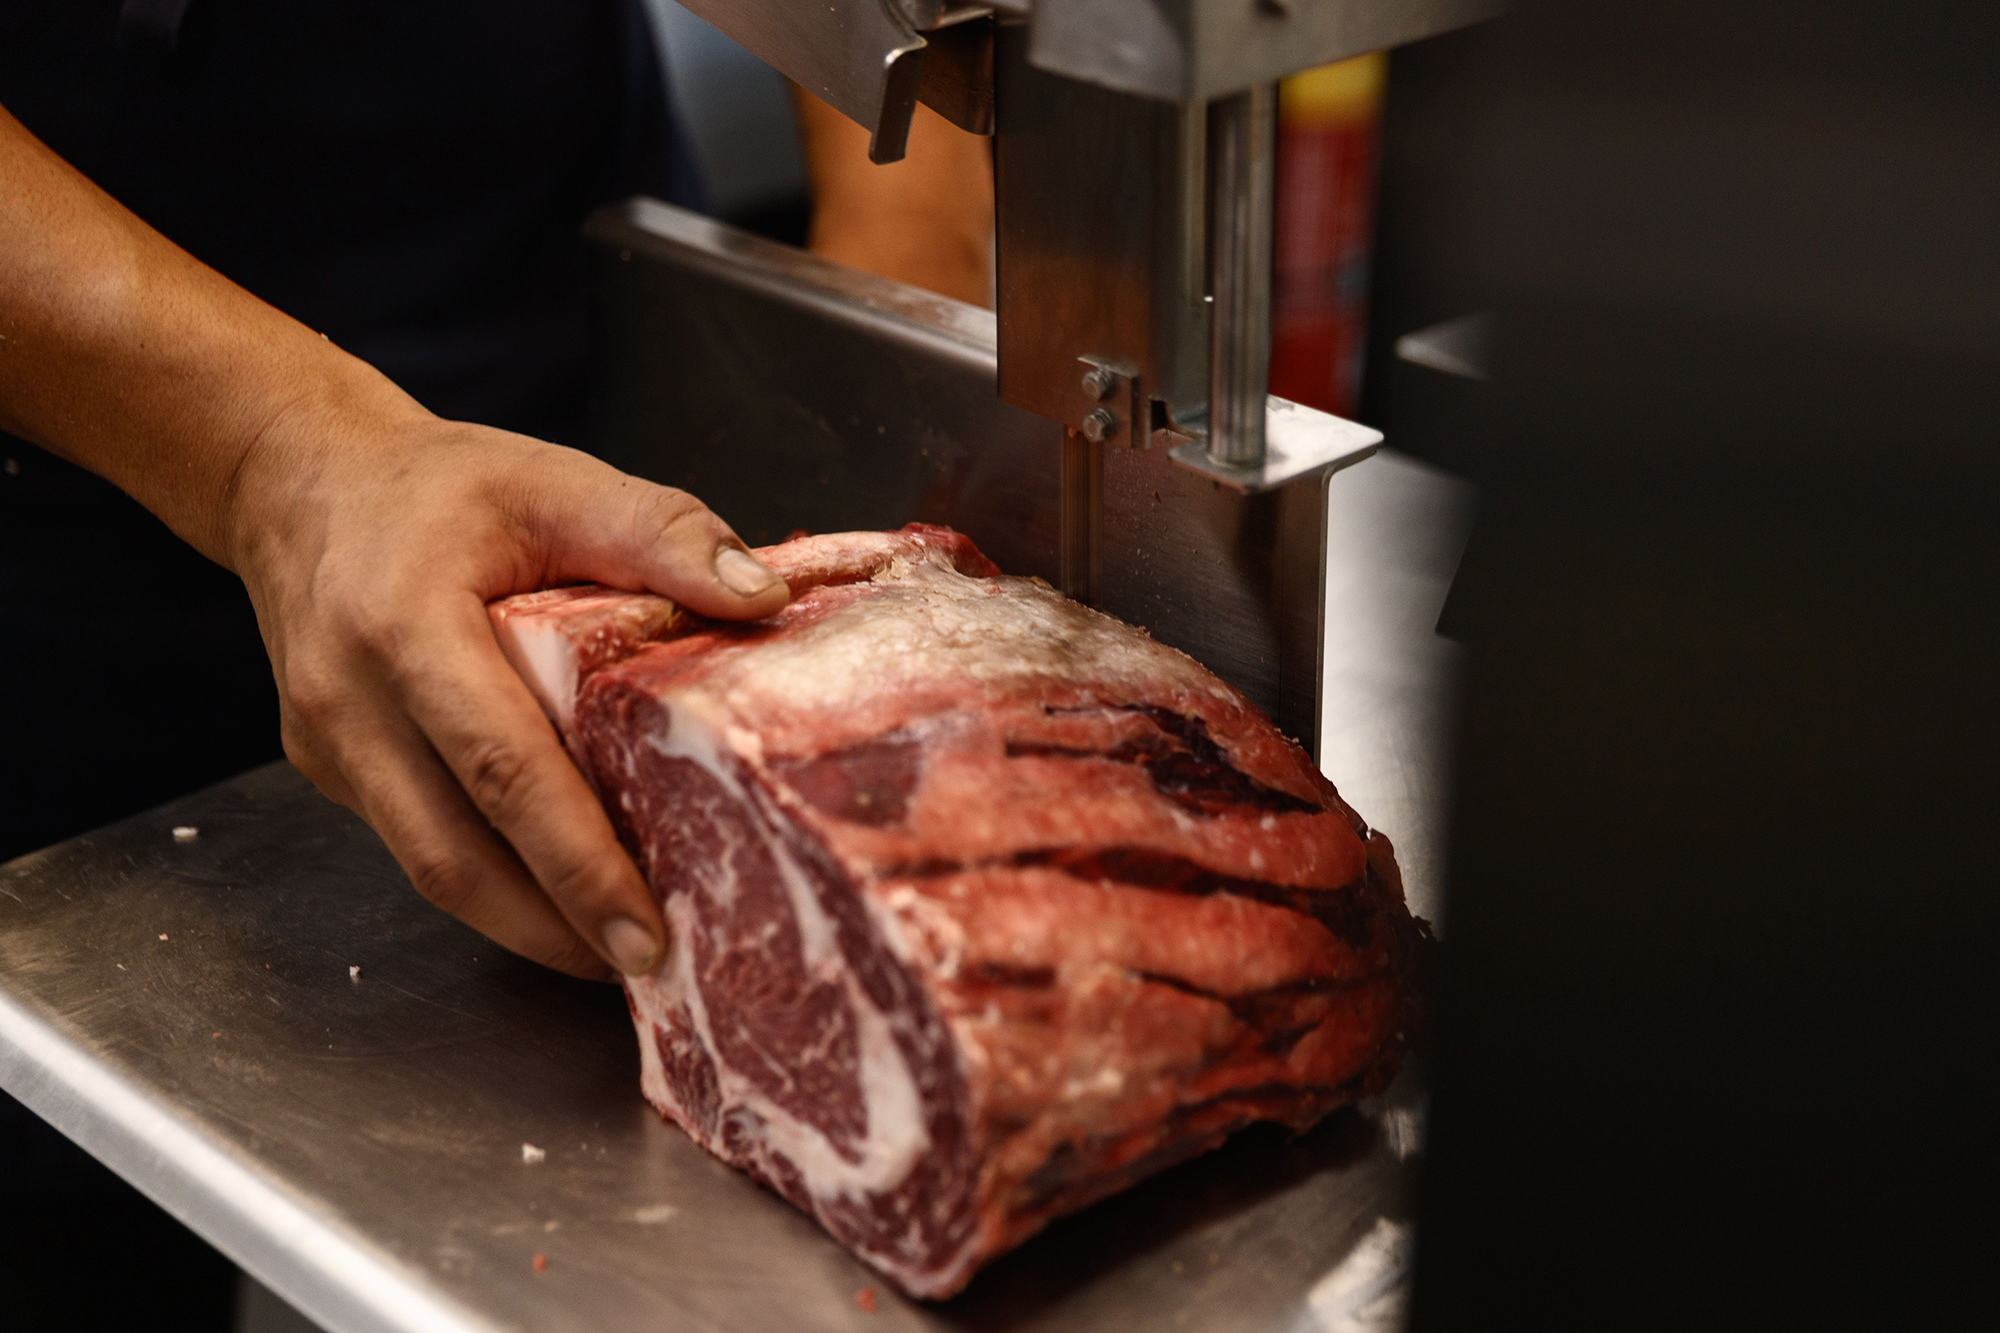 The Royal’s in-house butchery program teaches chefs respect for the animal.